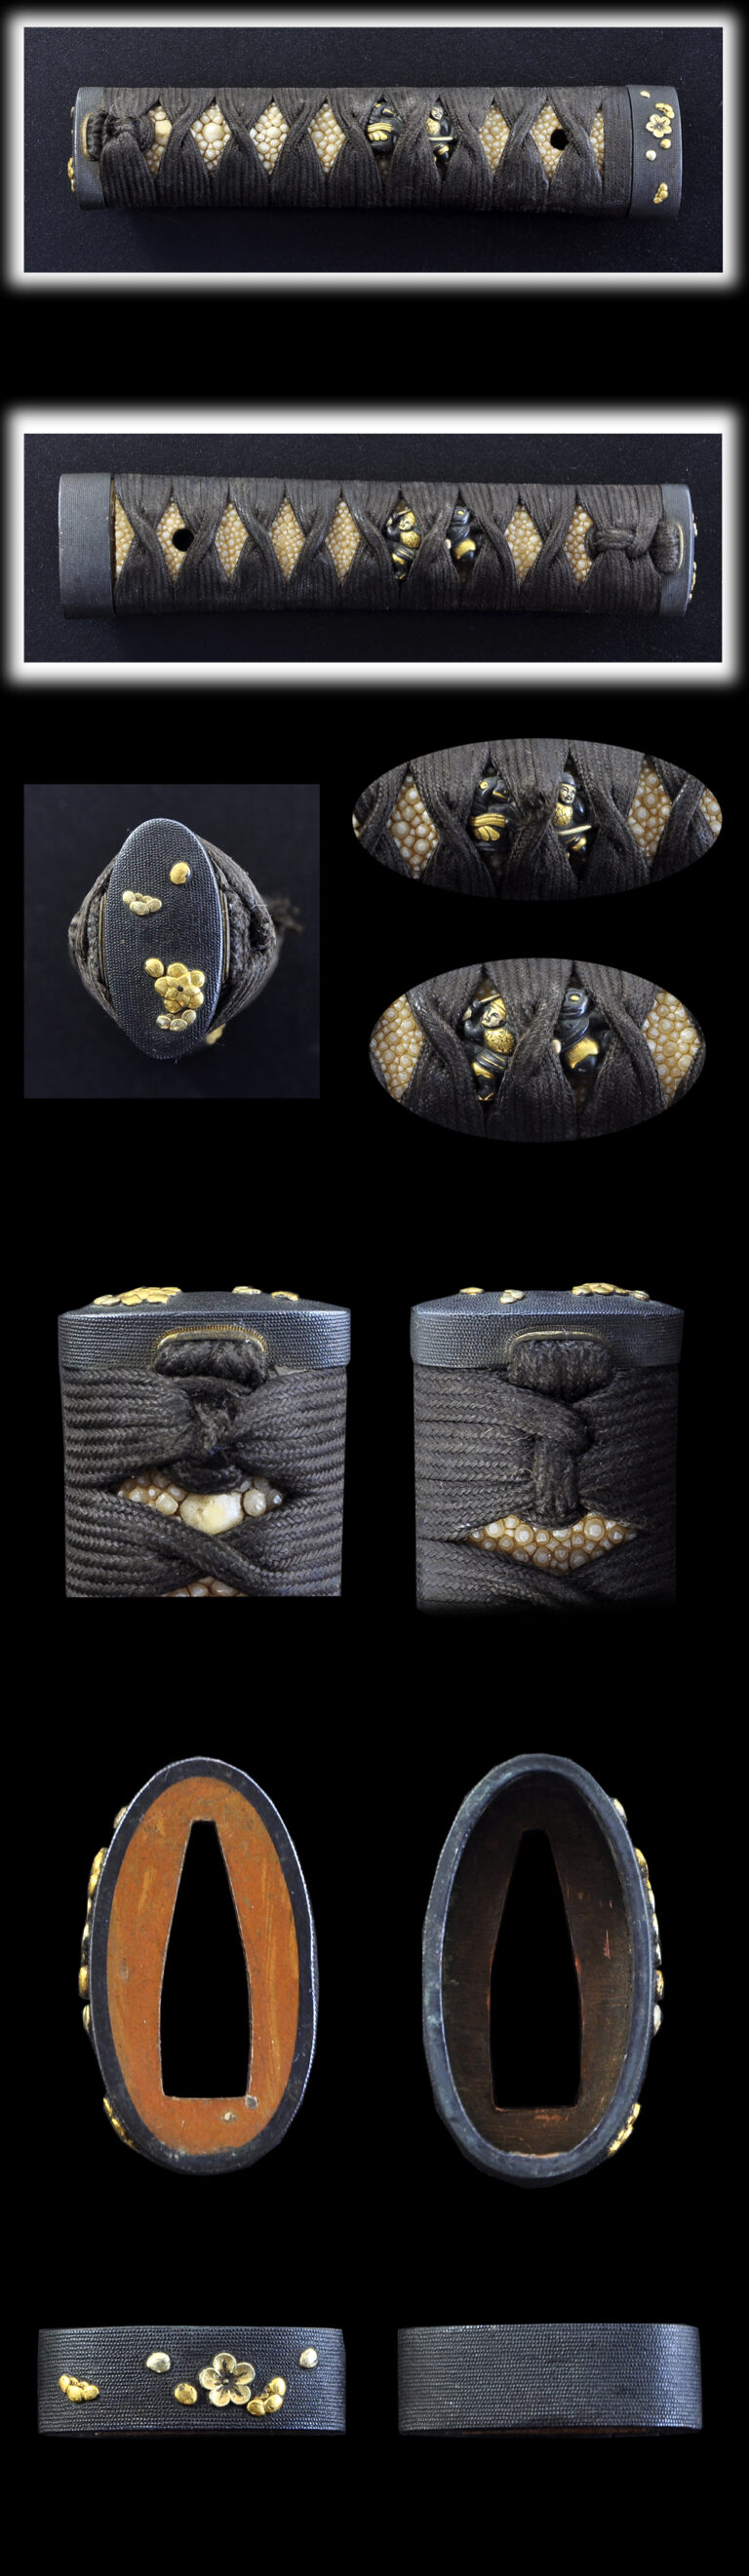 Tsuka:On the Shakudo plate, flower is engraved with gold color